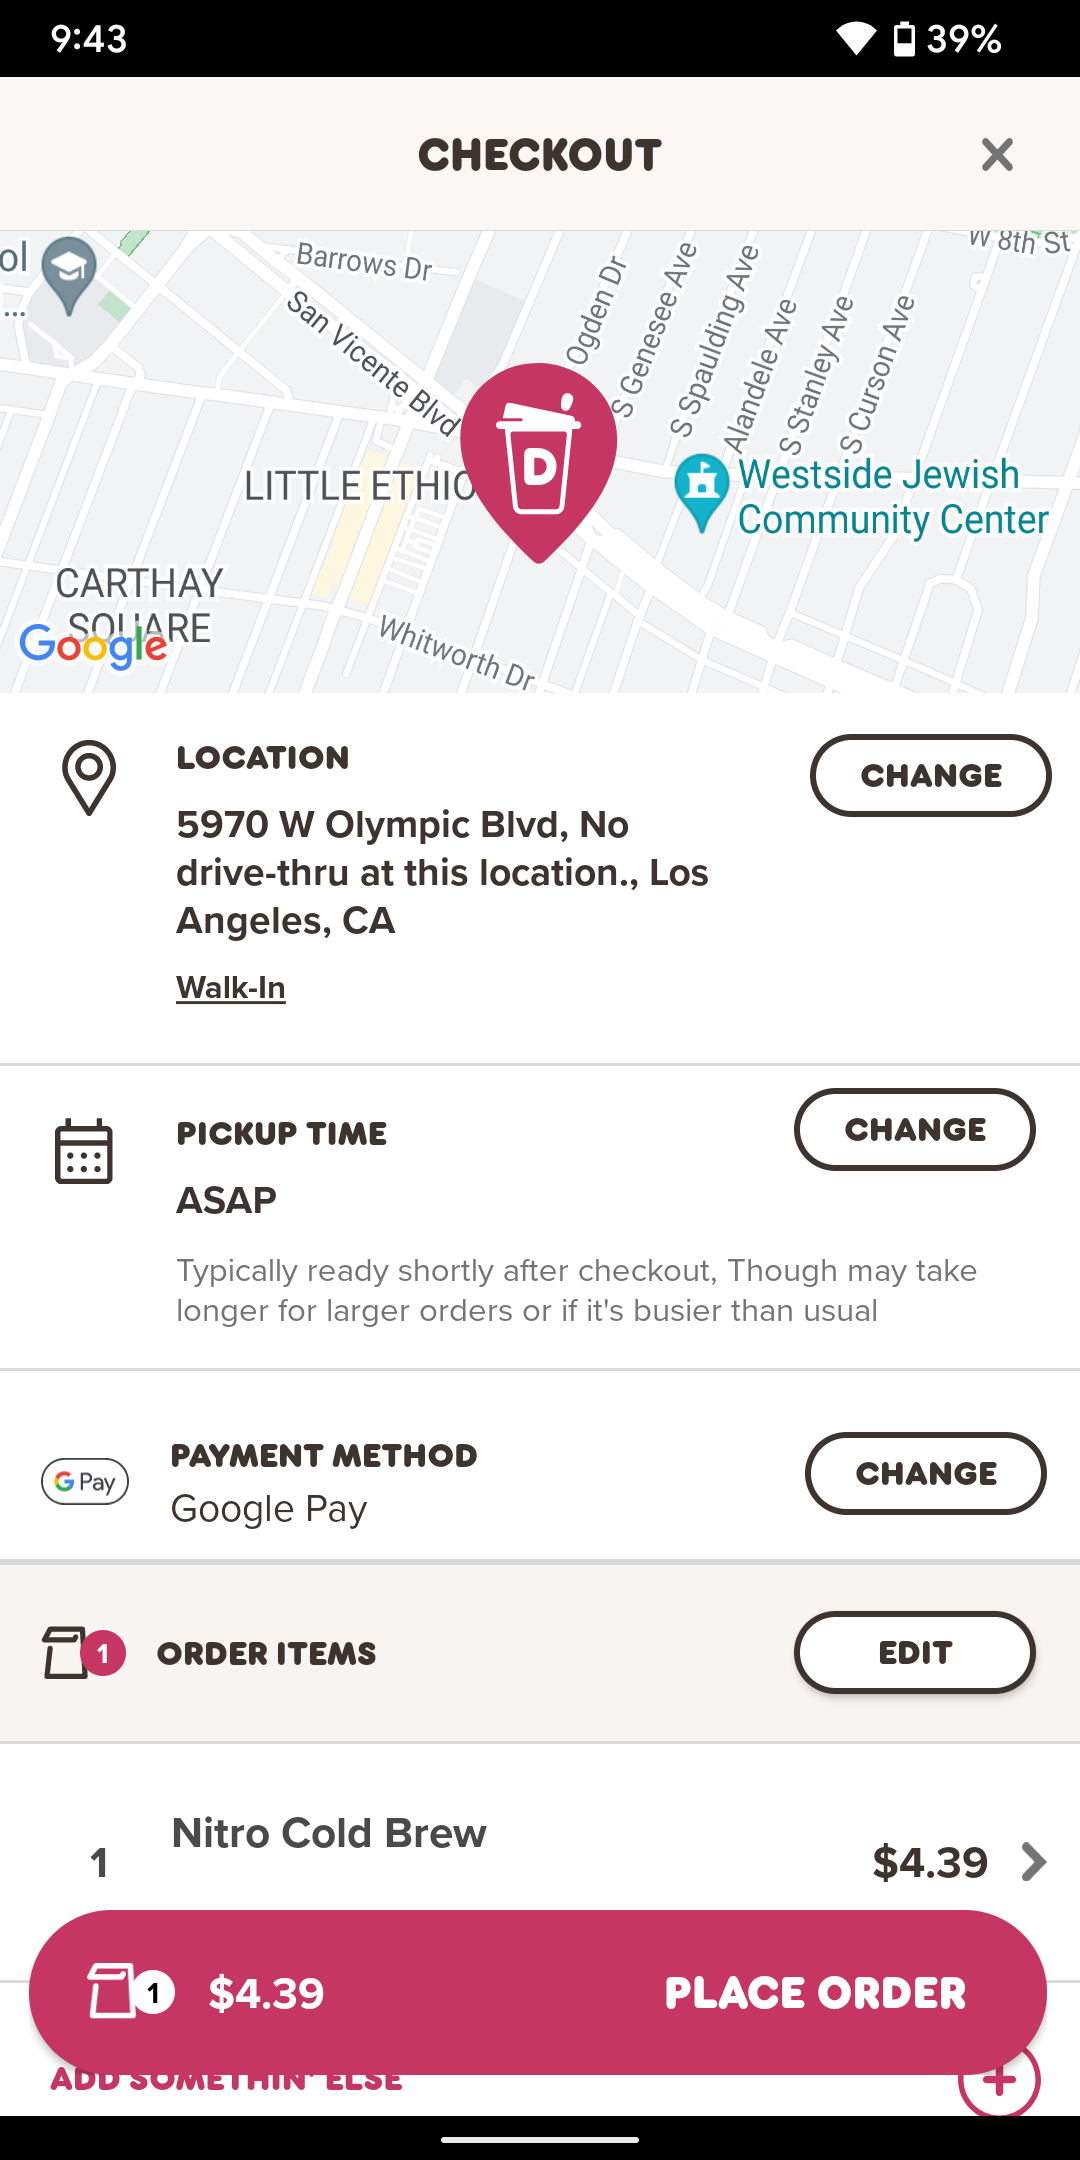 Dunkin' accepts Google Pay in its app.